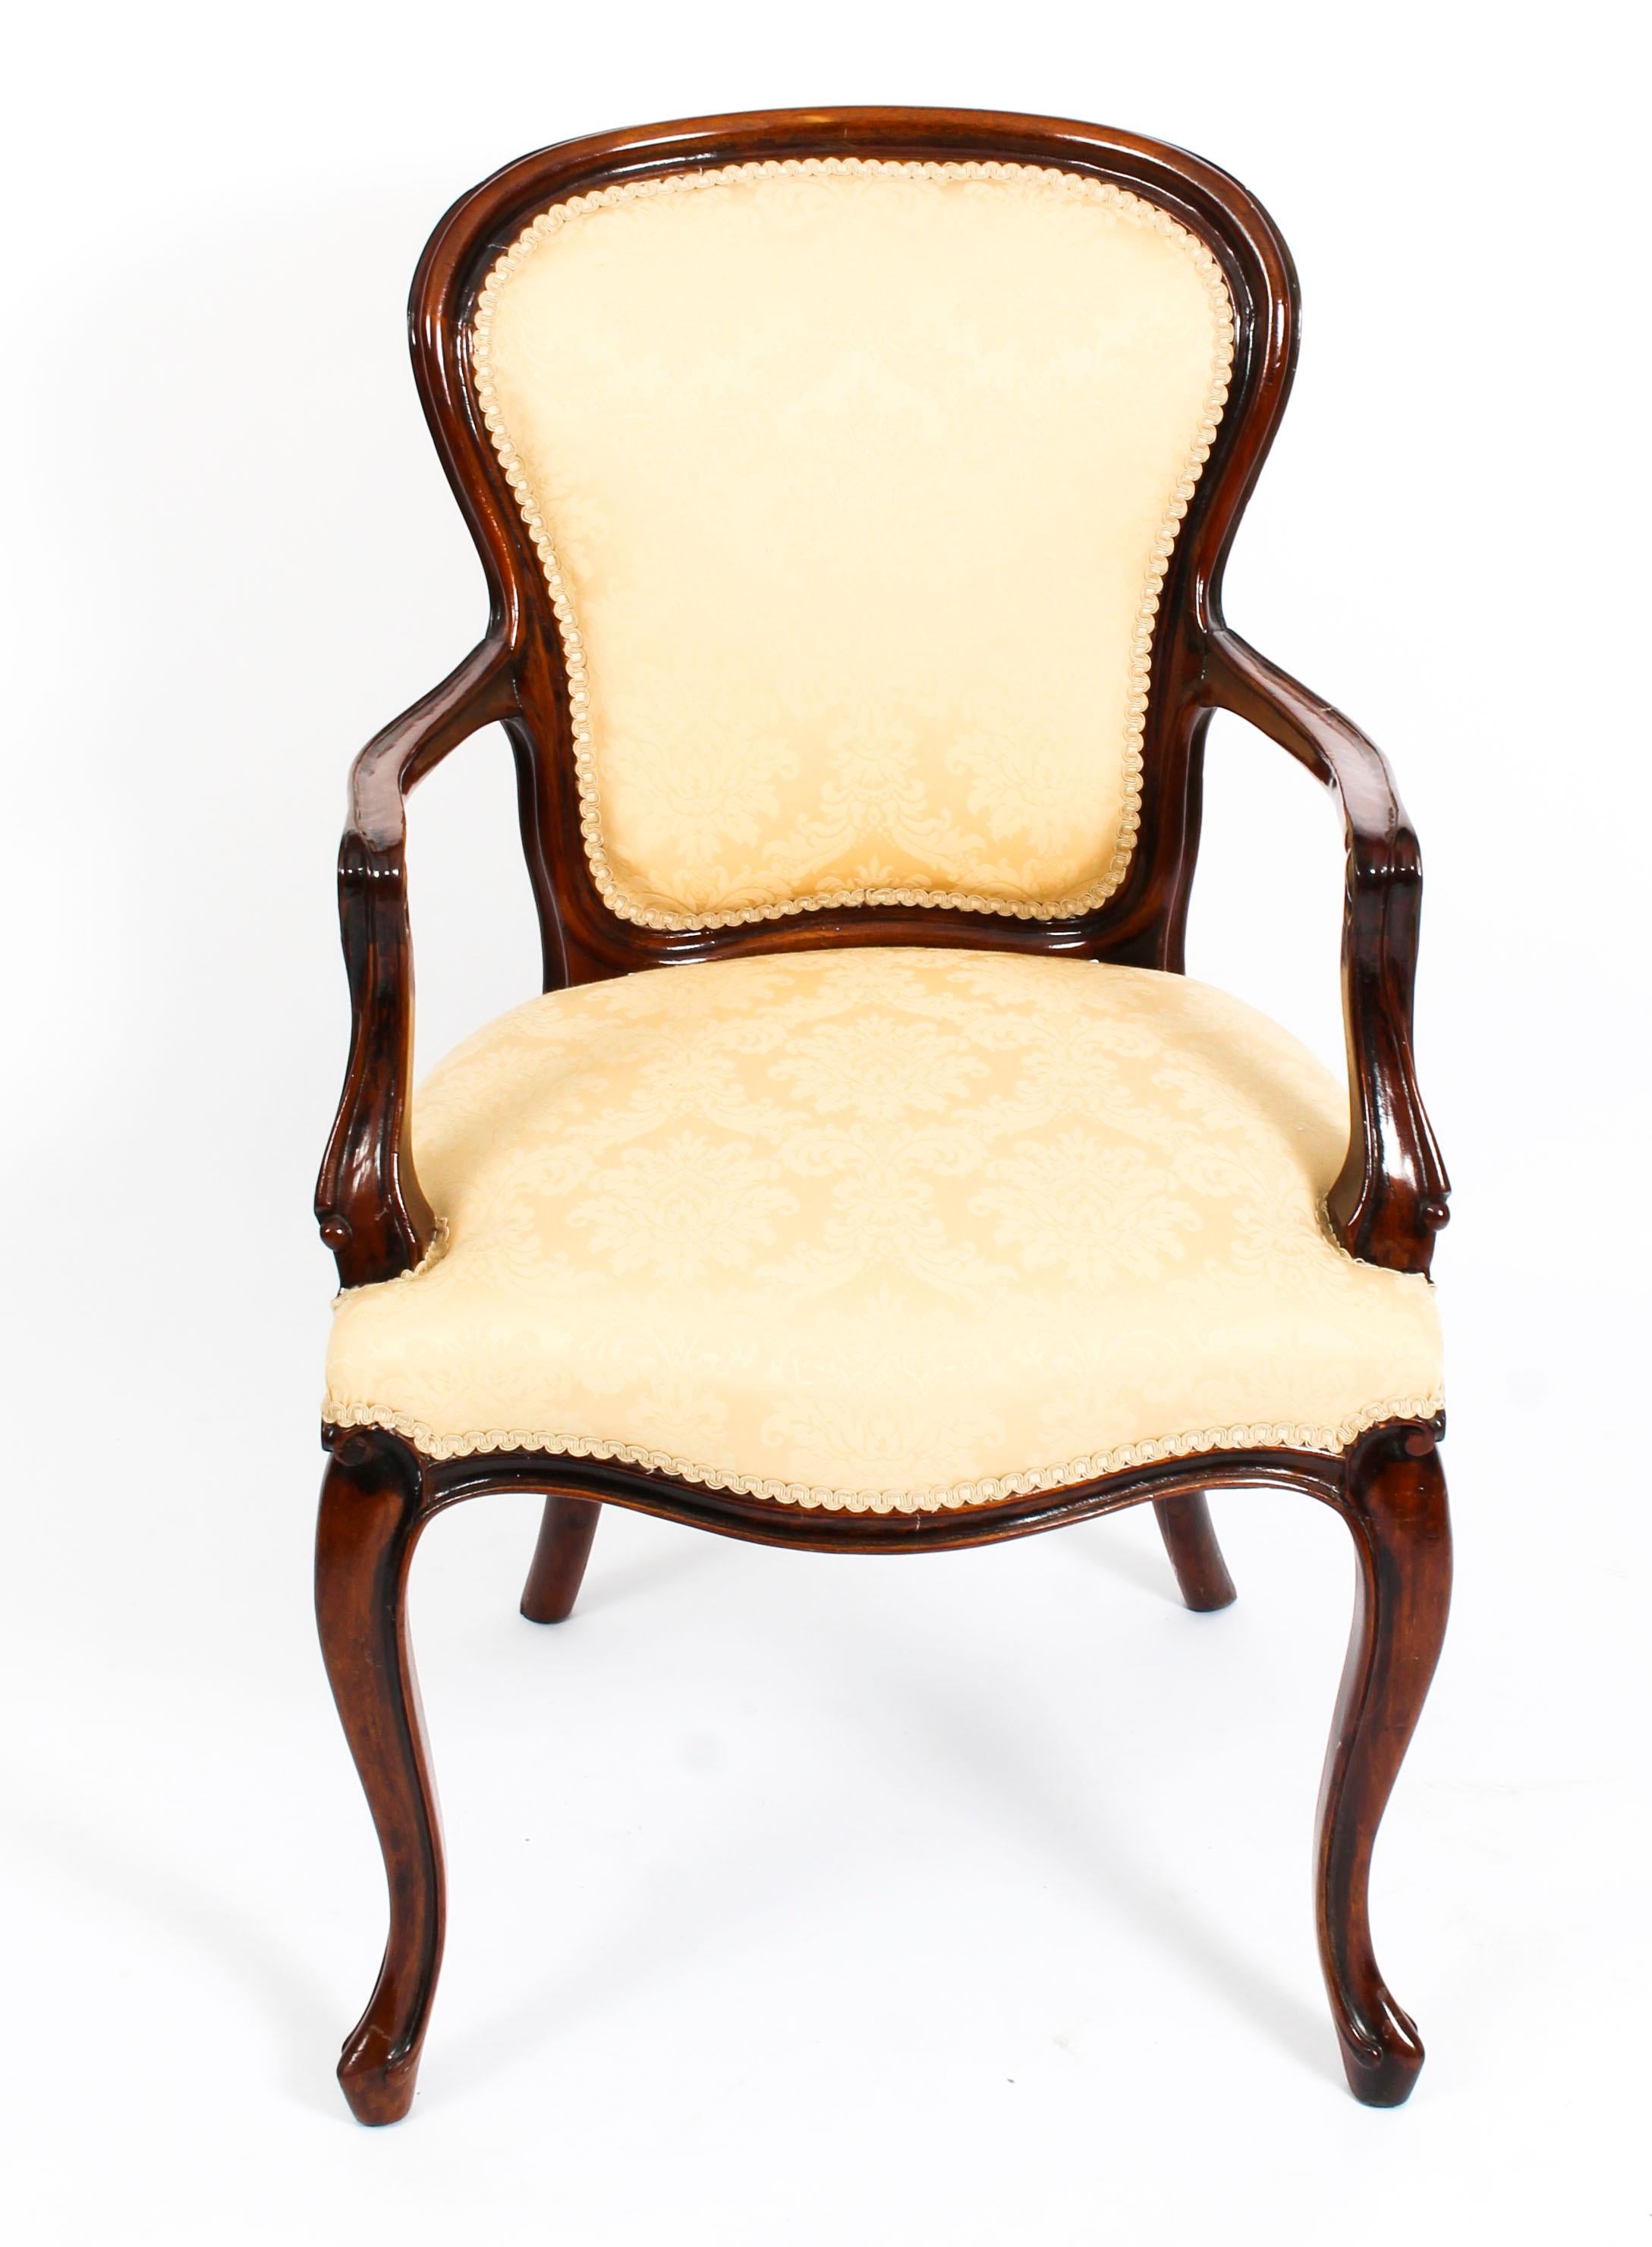 This is a beautiful antique Louis Revival mahogany armchair, dating from the late 19th century.

It has been skillfully carved from solid mahogany and beautifully reupholstered in gold damask.

It has been expertly carved with a shaped